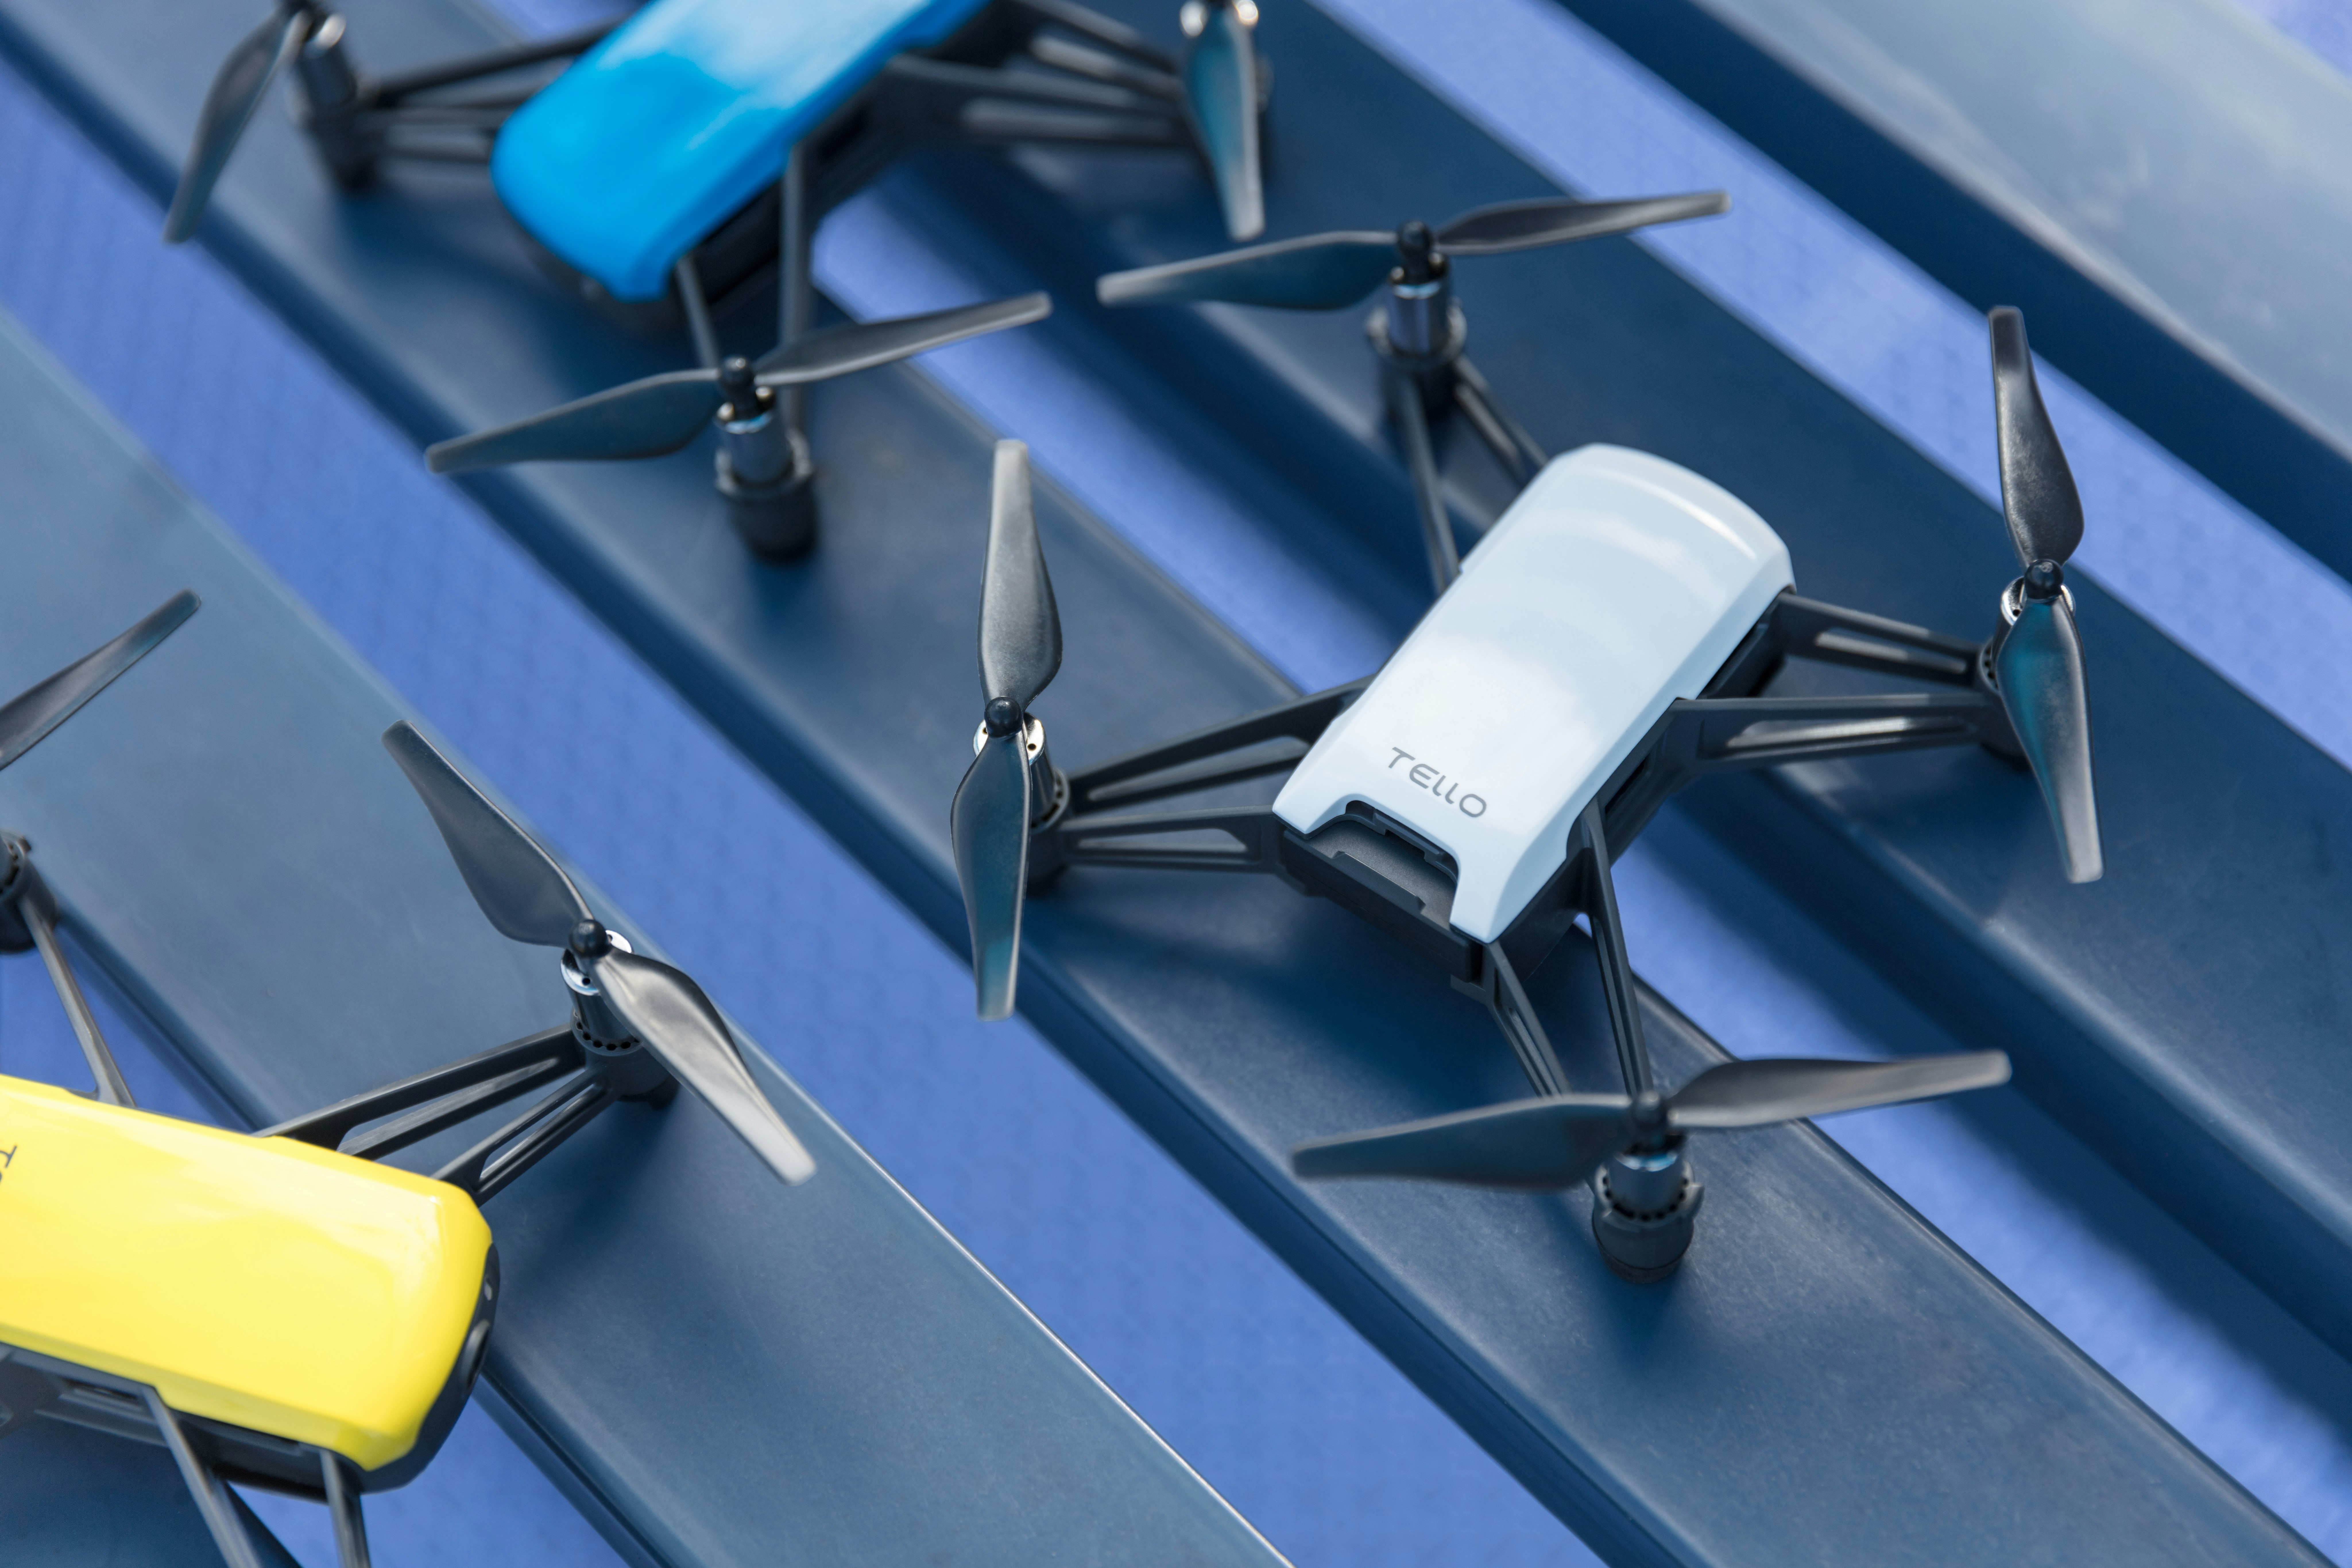 Three small drones in blue, white and yellow, with rotors extended